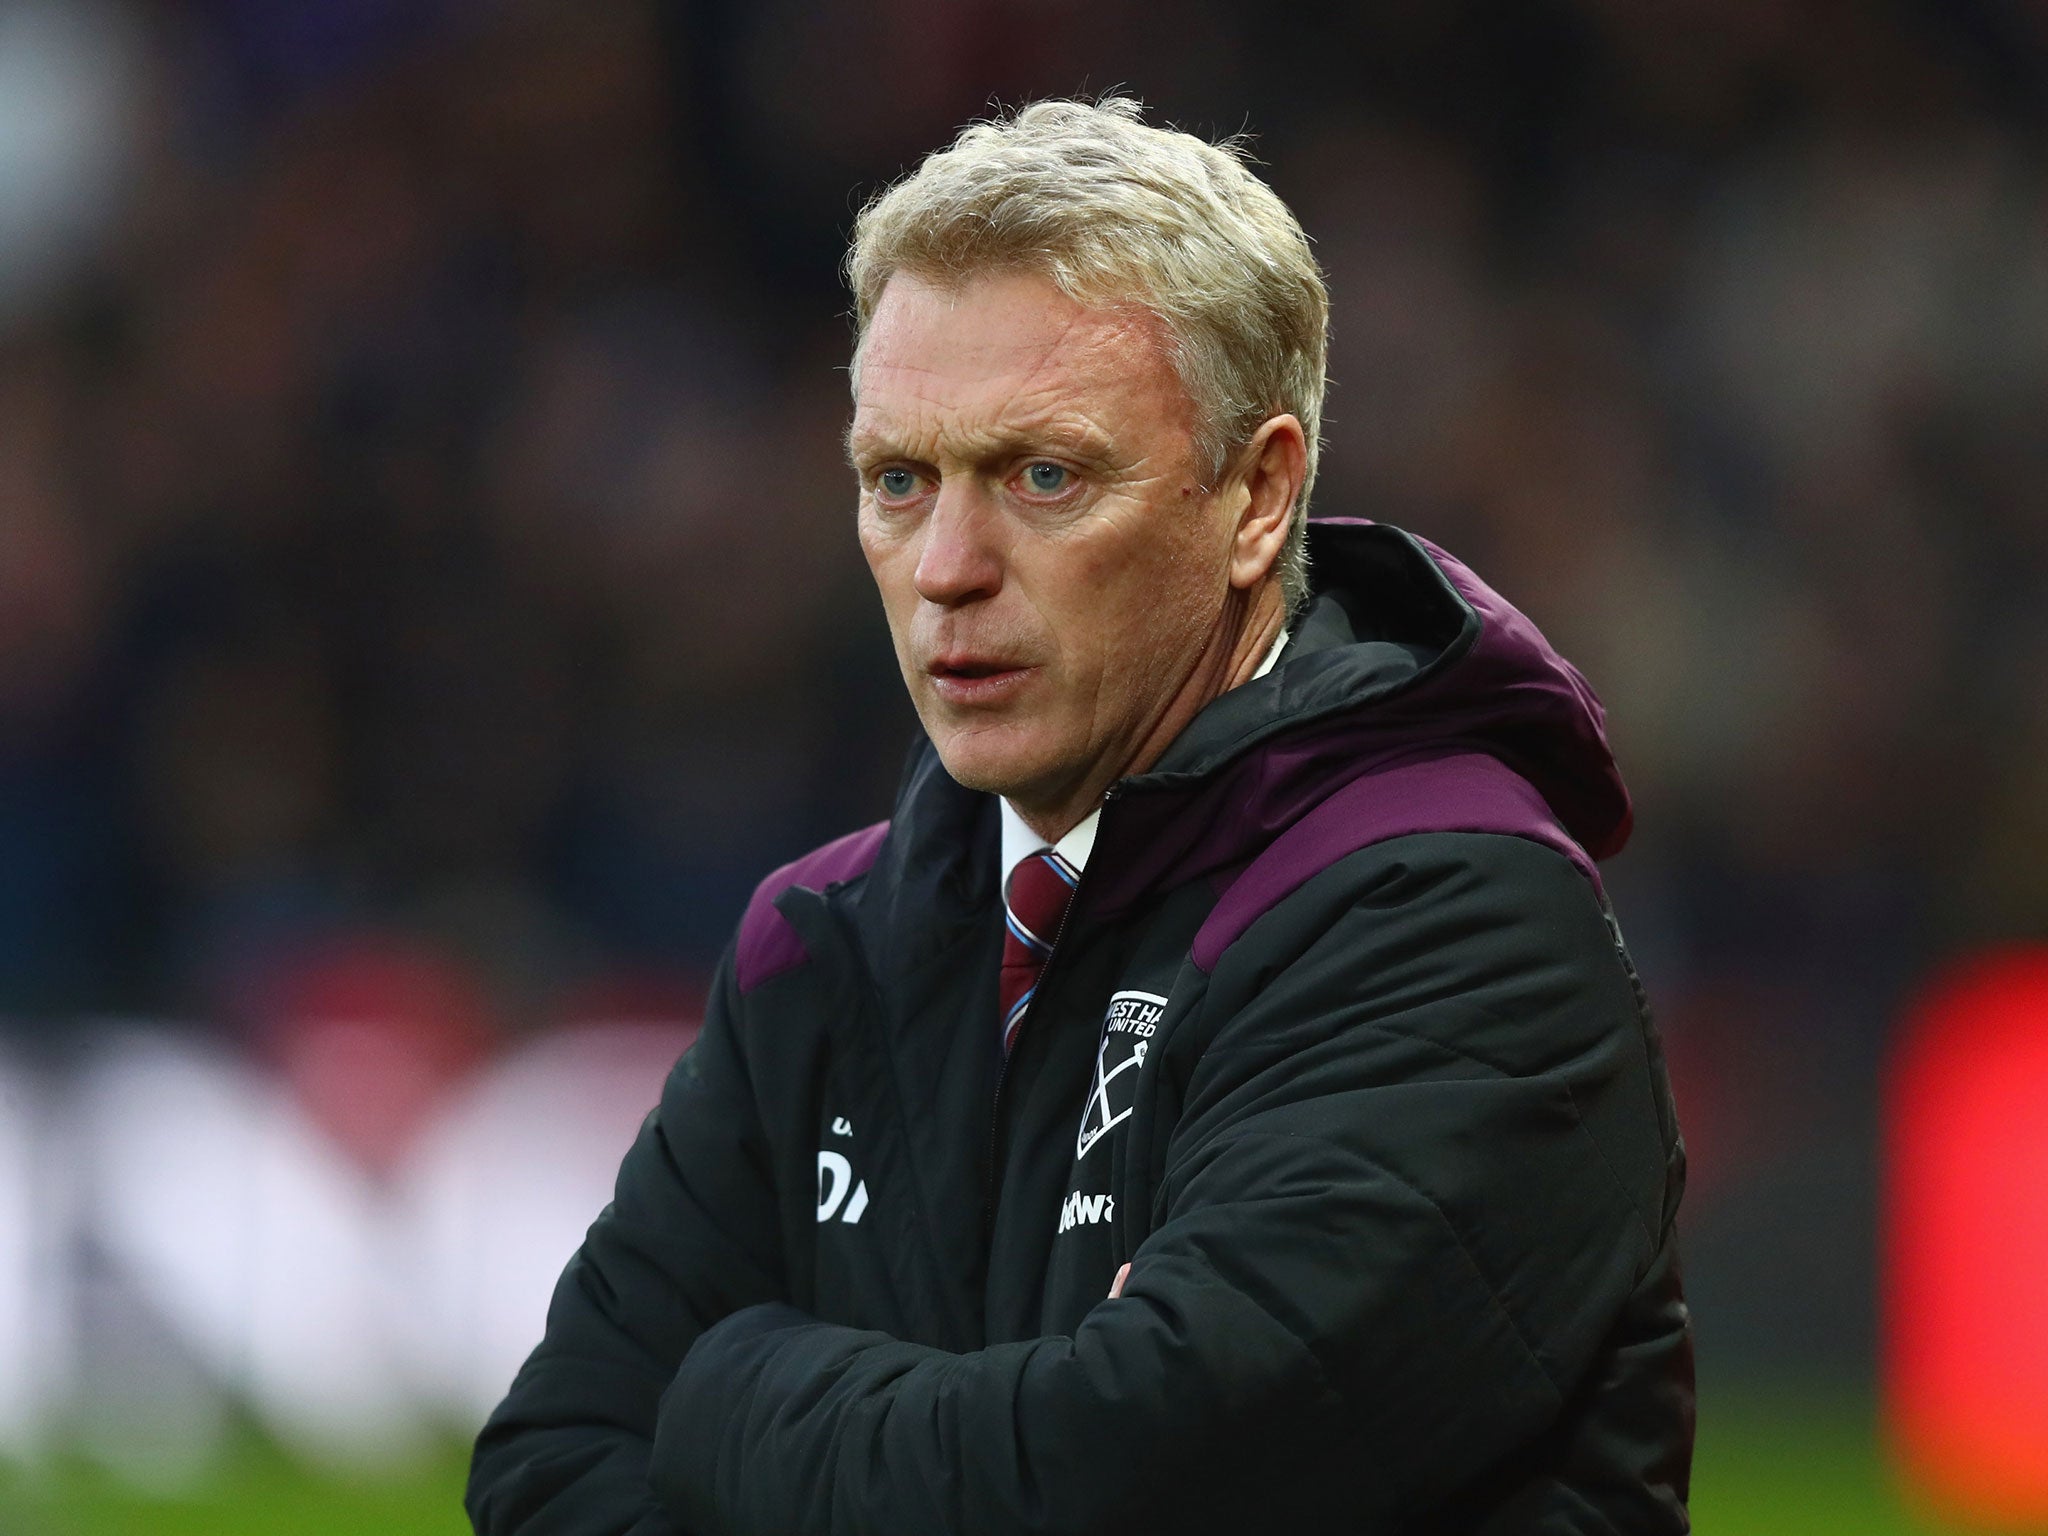 David Moyes' first game in charge didn't go to plan